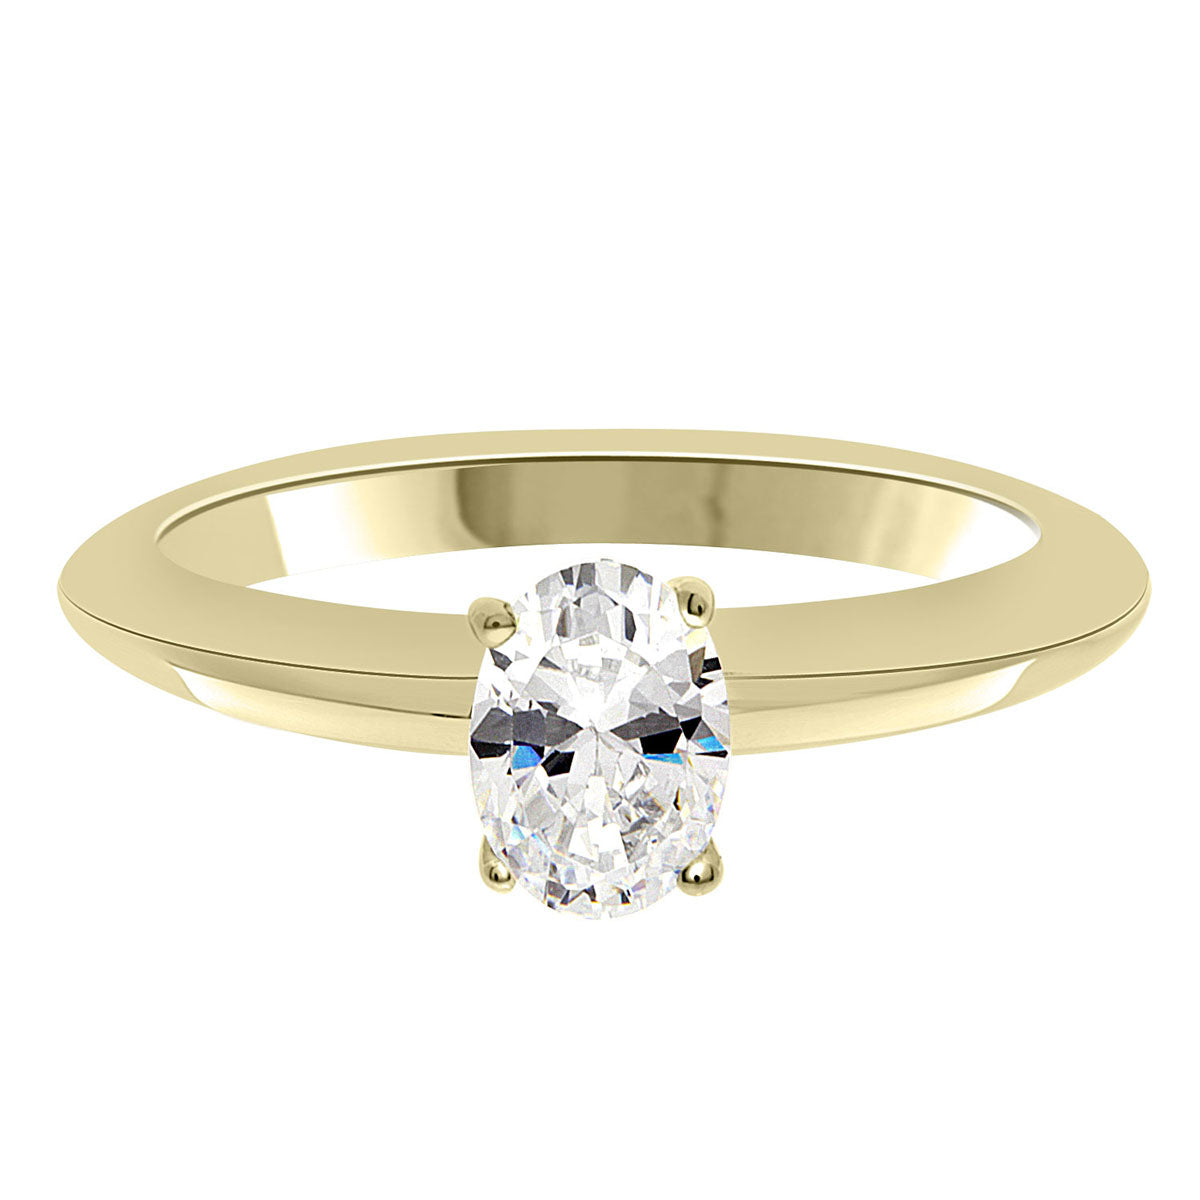 Knife Edge Band Engagement Ring in yellow gold metal